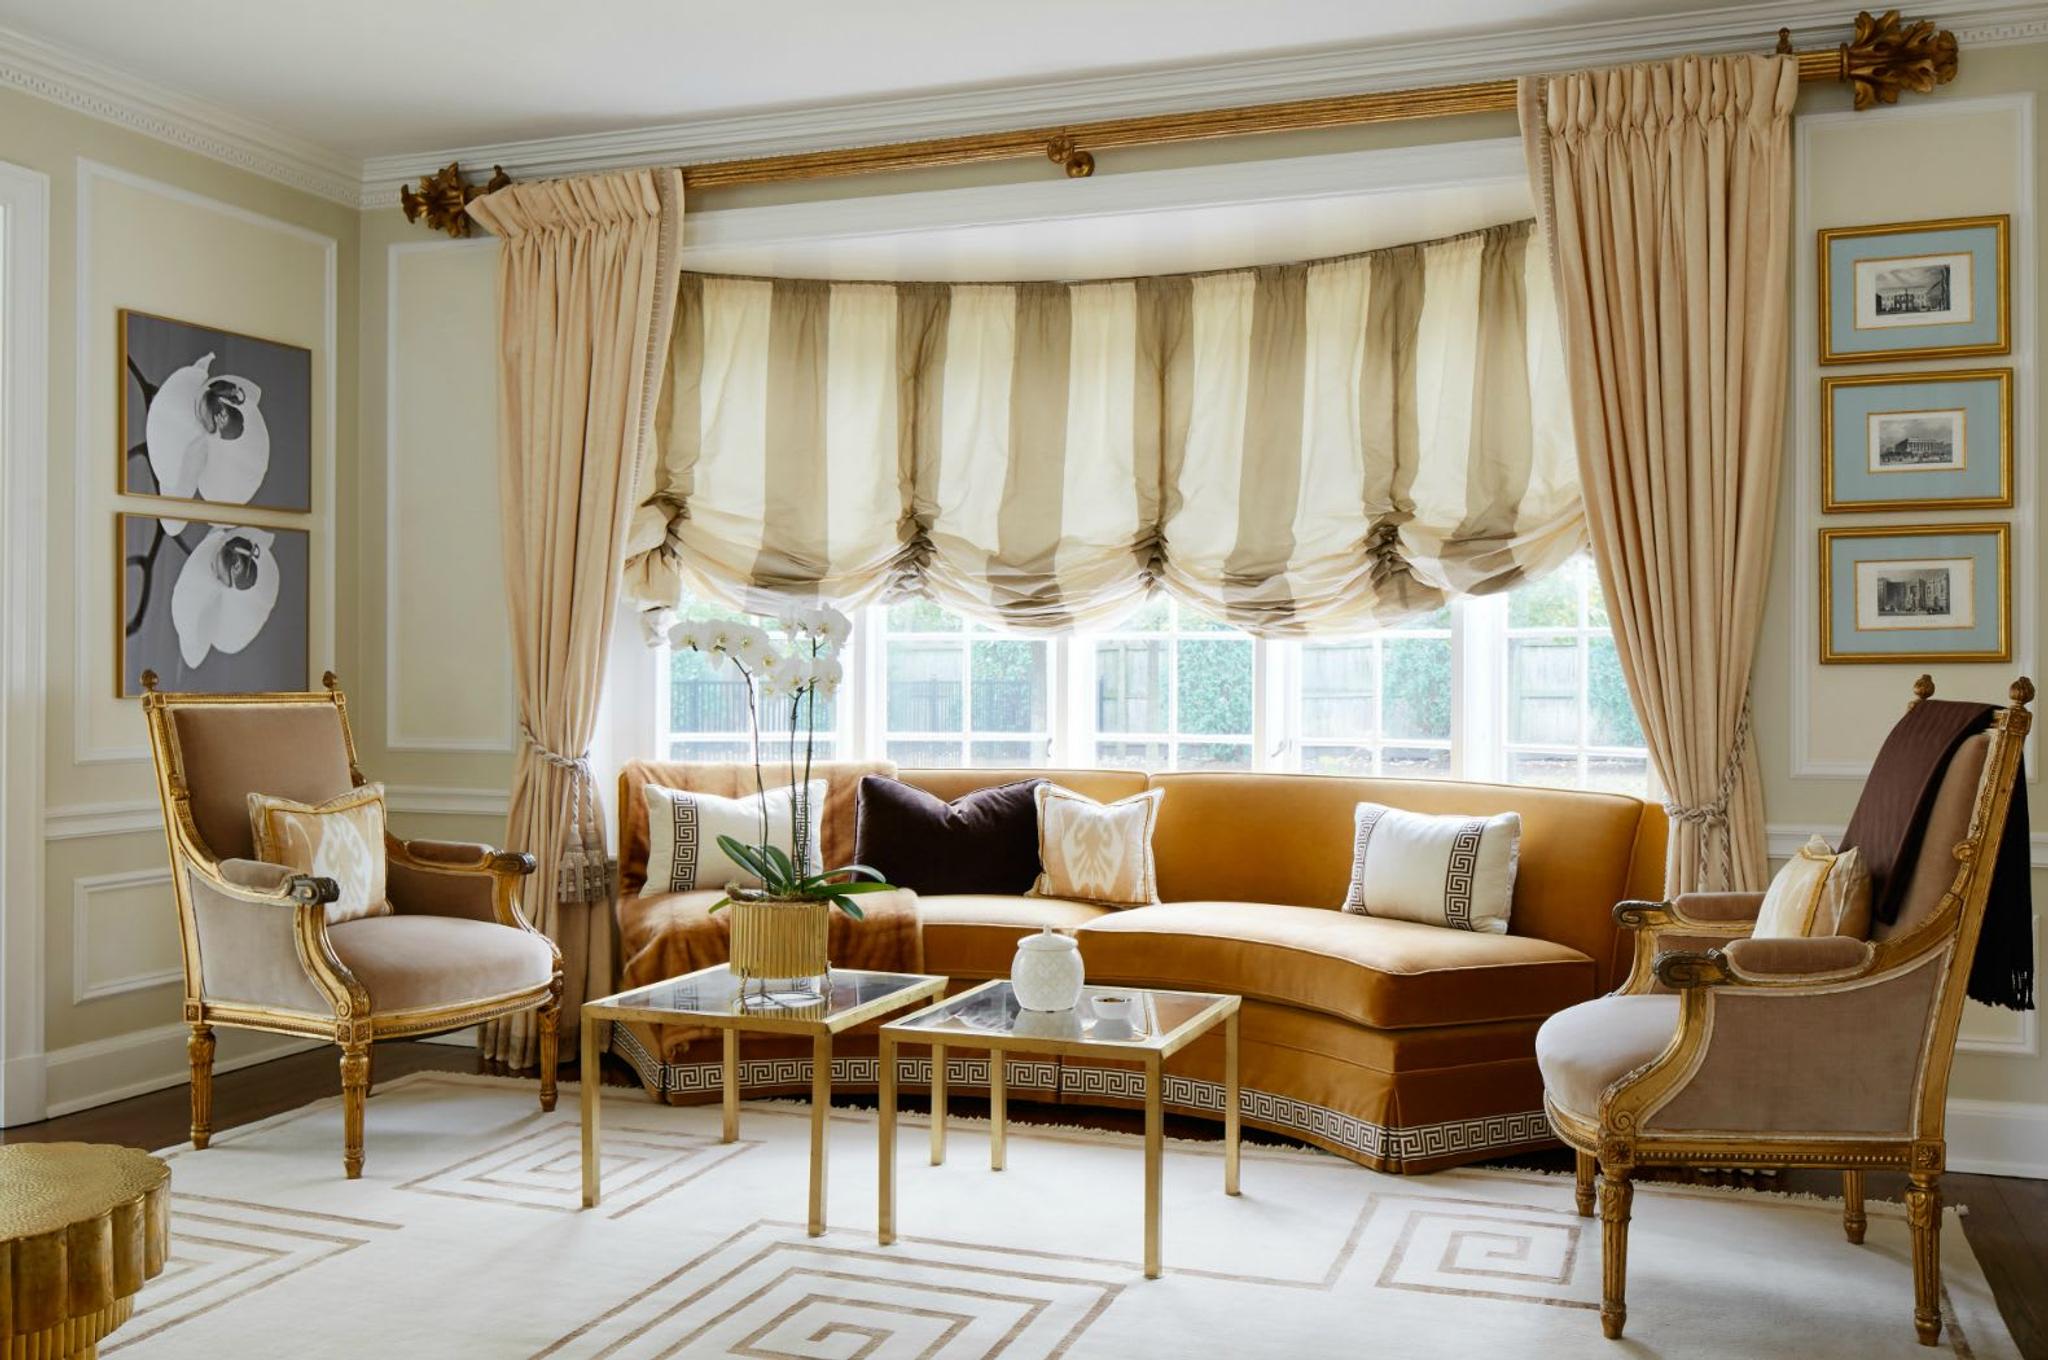 View of Shelley's home seating bow window - a luminous and airy space on the tones of gold.